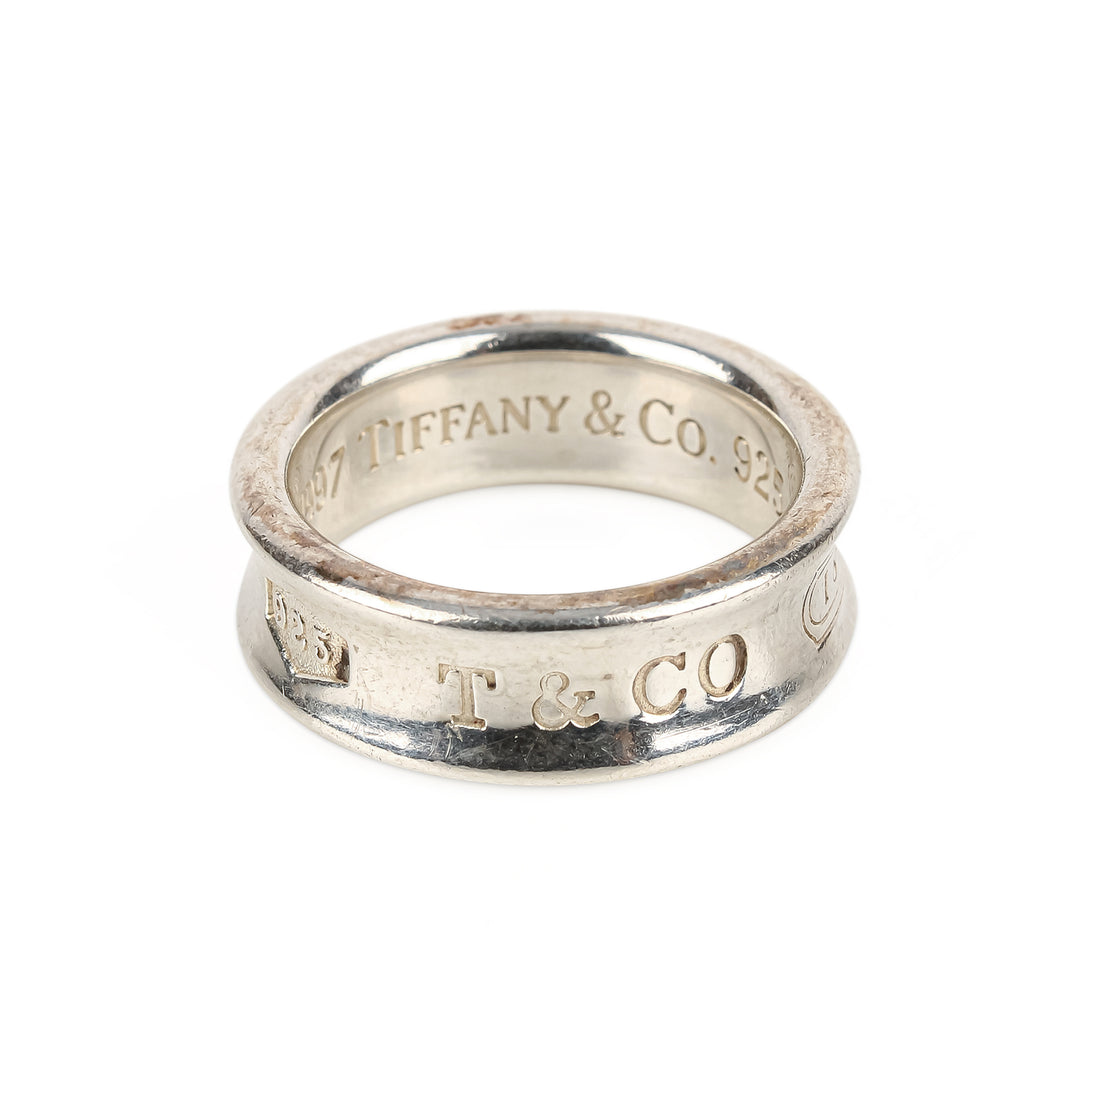 TIFFANY & CO. Sterling Silver 1837 Ring 733